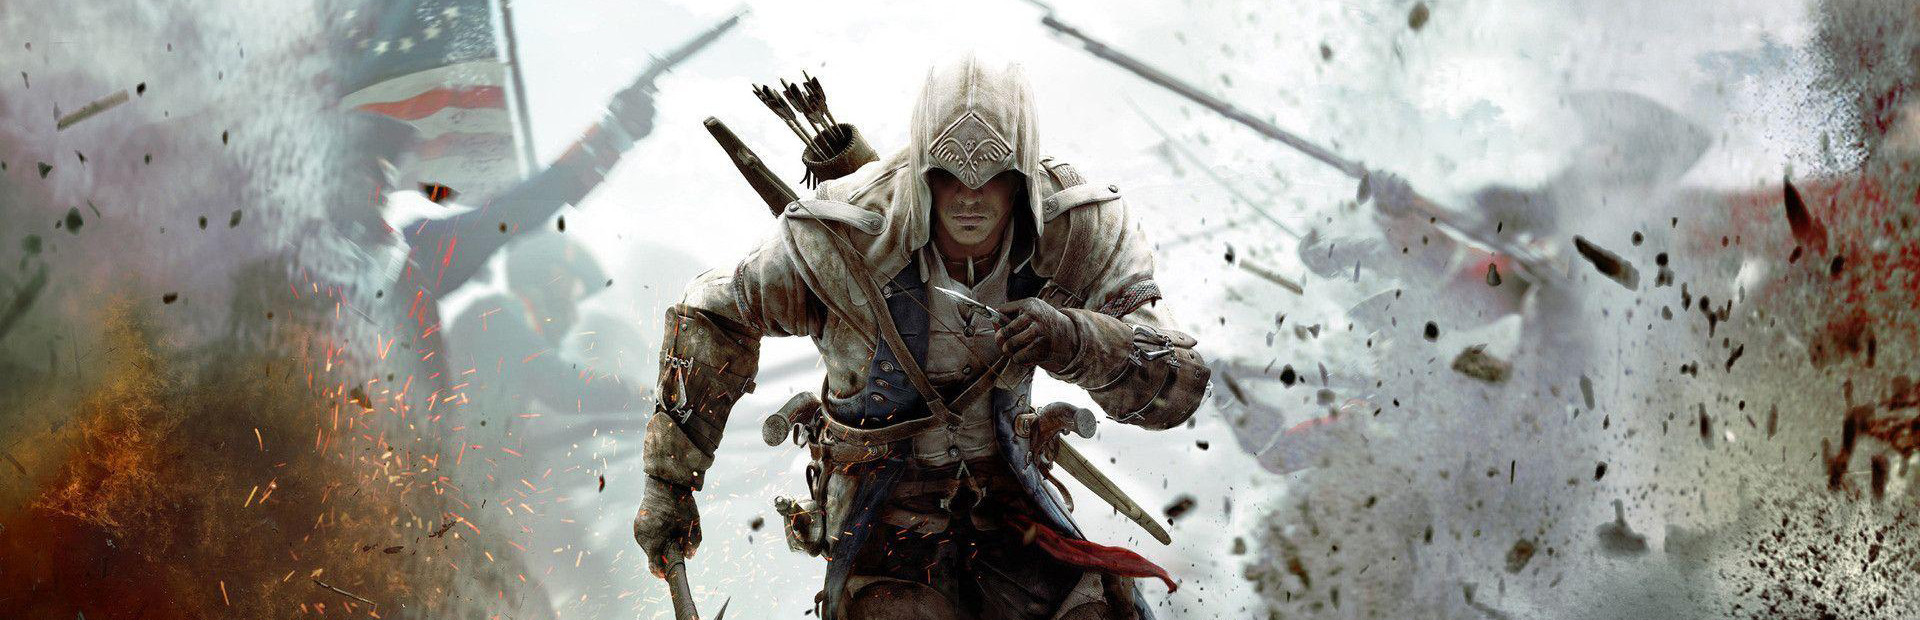 Assassin’s Creed® III cover image